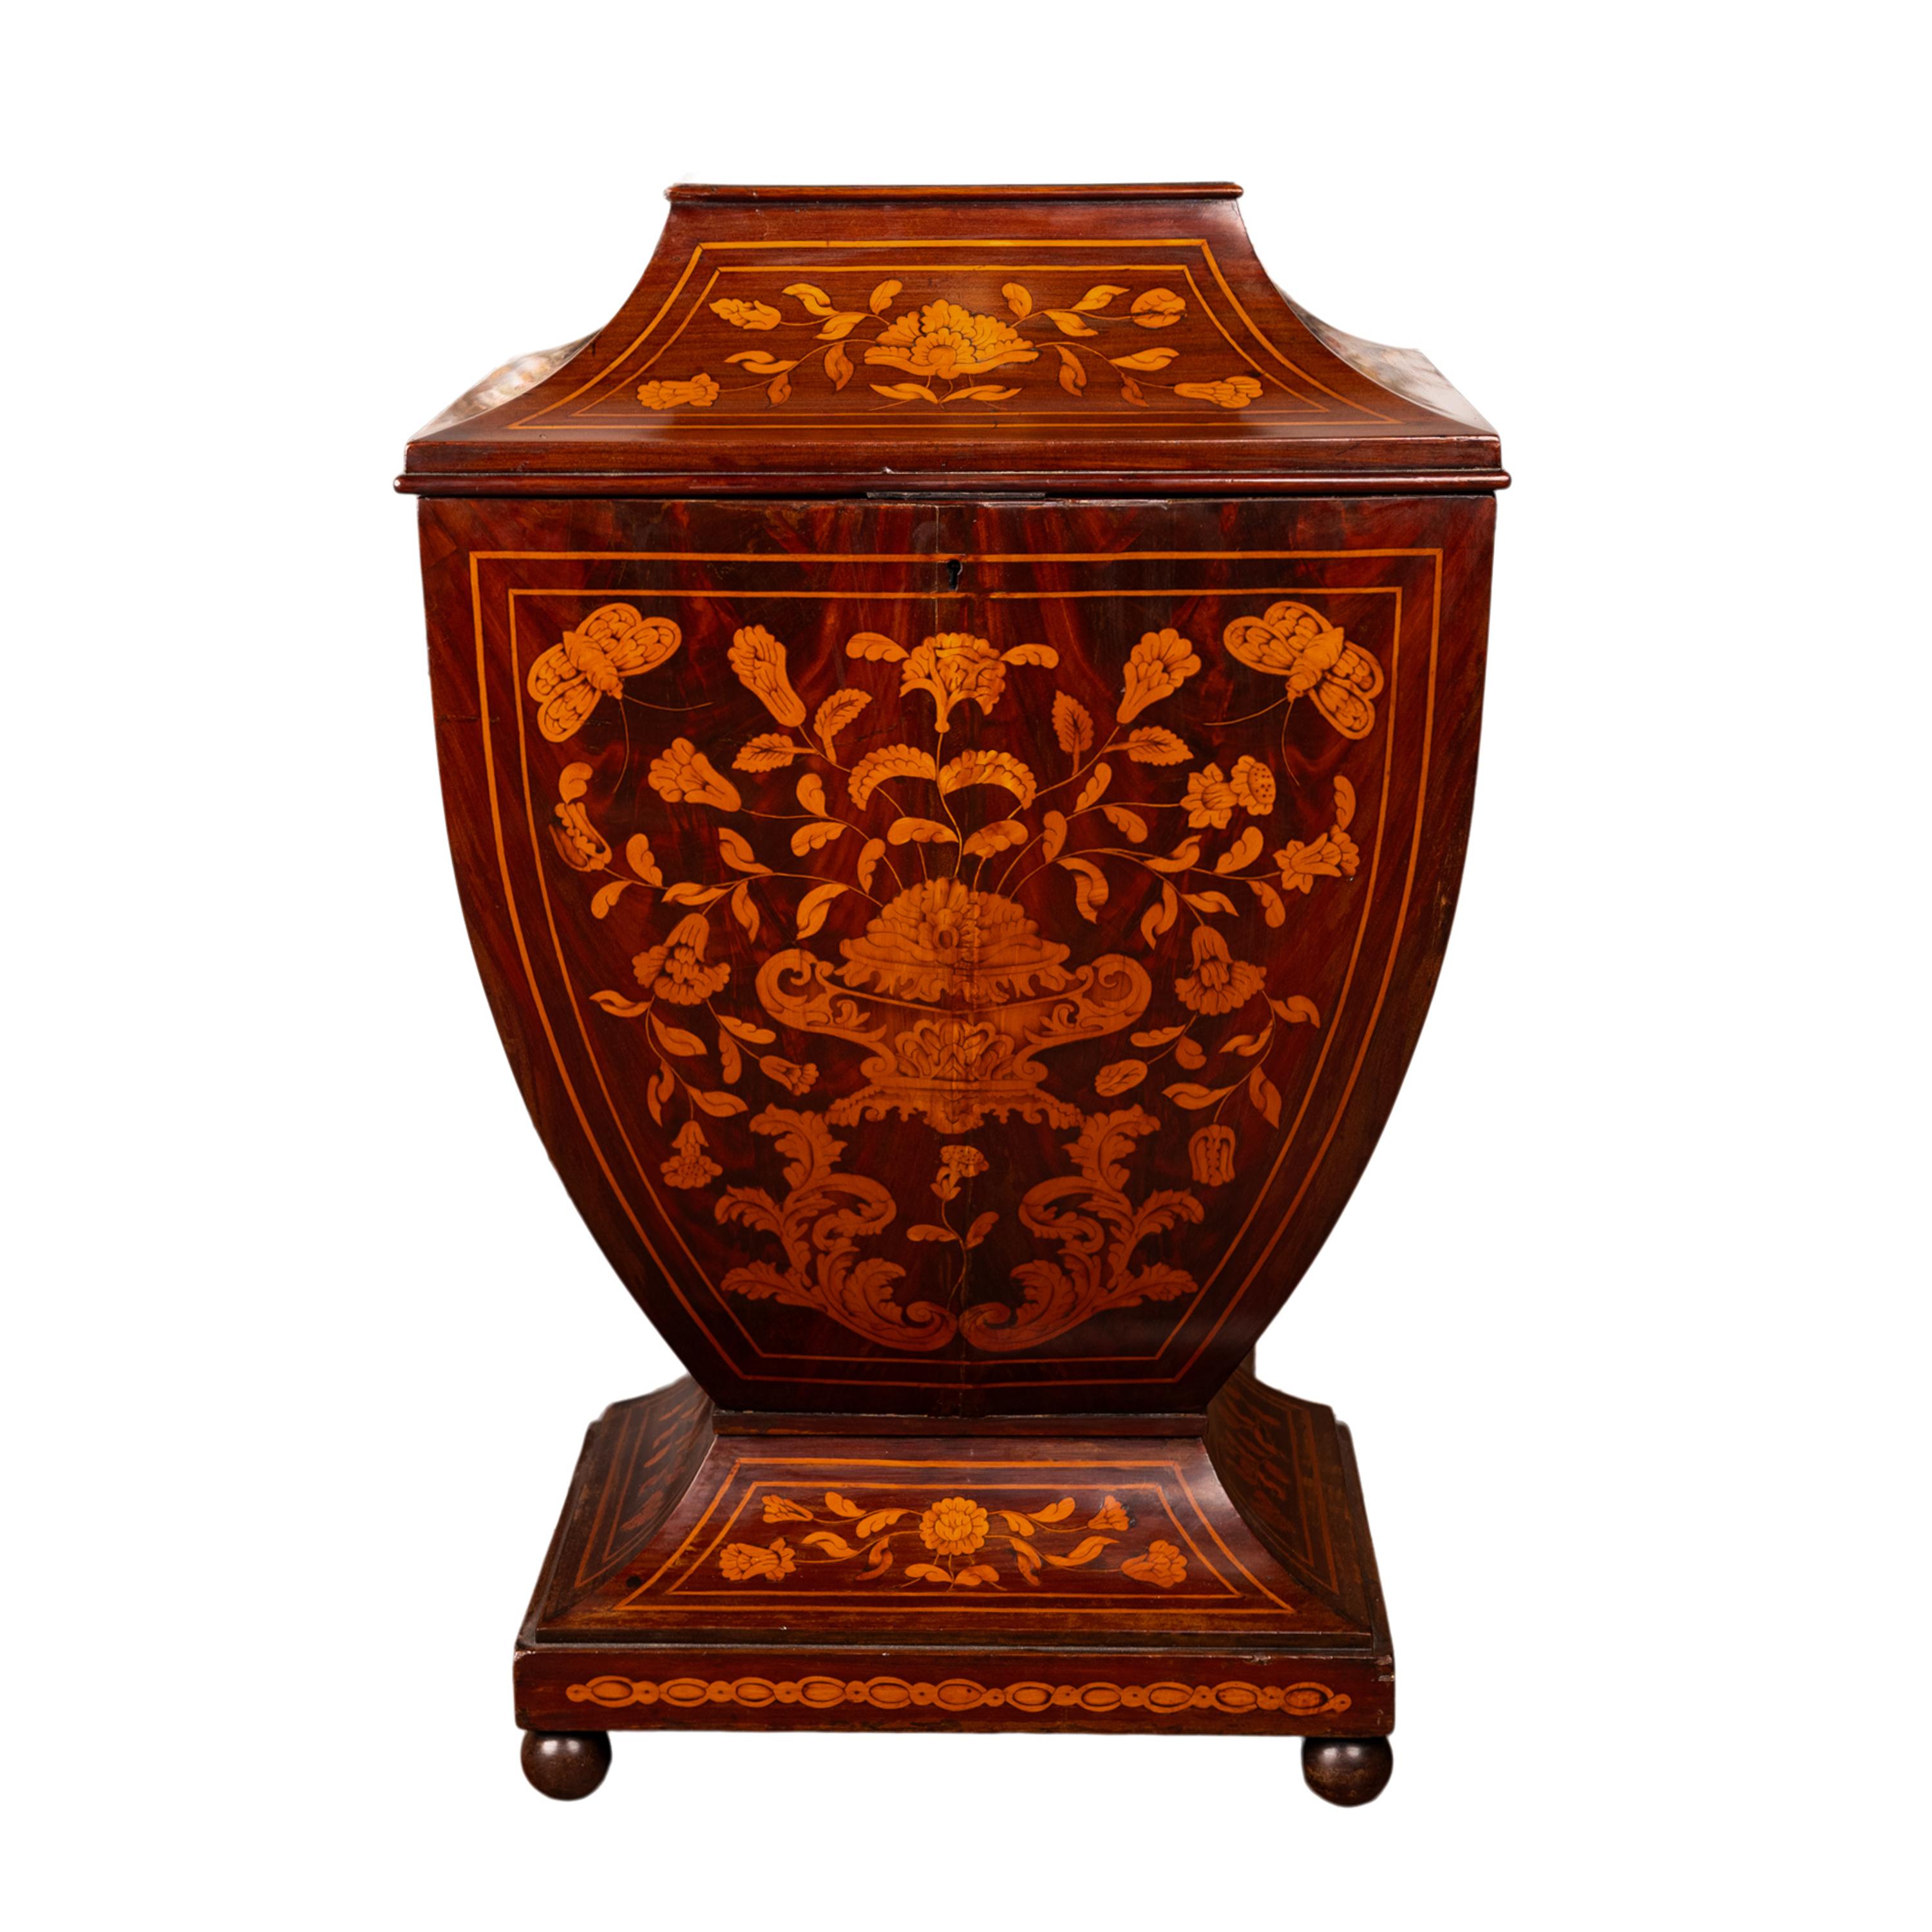 An exceptionally rare & fine antique Dutch marquetry bombe shaped rosewood wine cellarette/cooler, circa 1760.
The hinged top of ogee/sarcophagus form and finely inlaid with floral panels, enclosing a storage area for wine bottles. The base is of